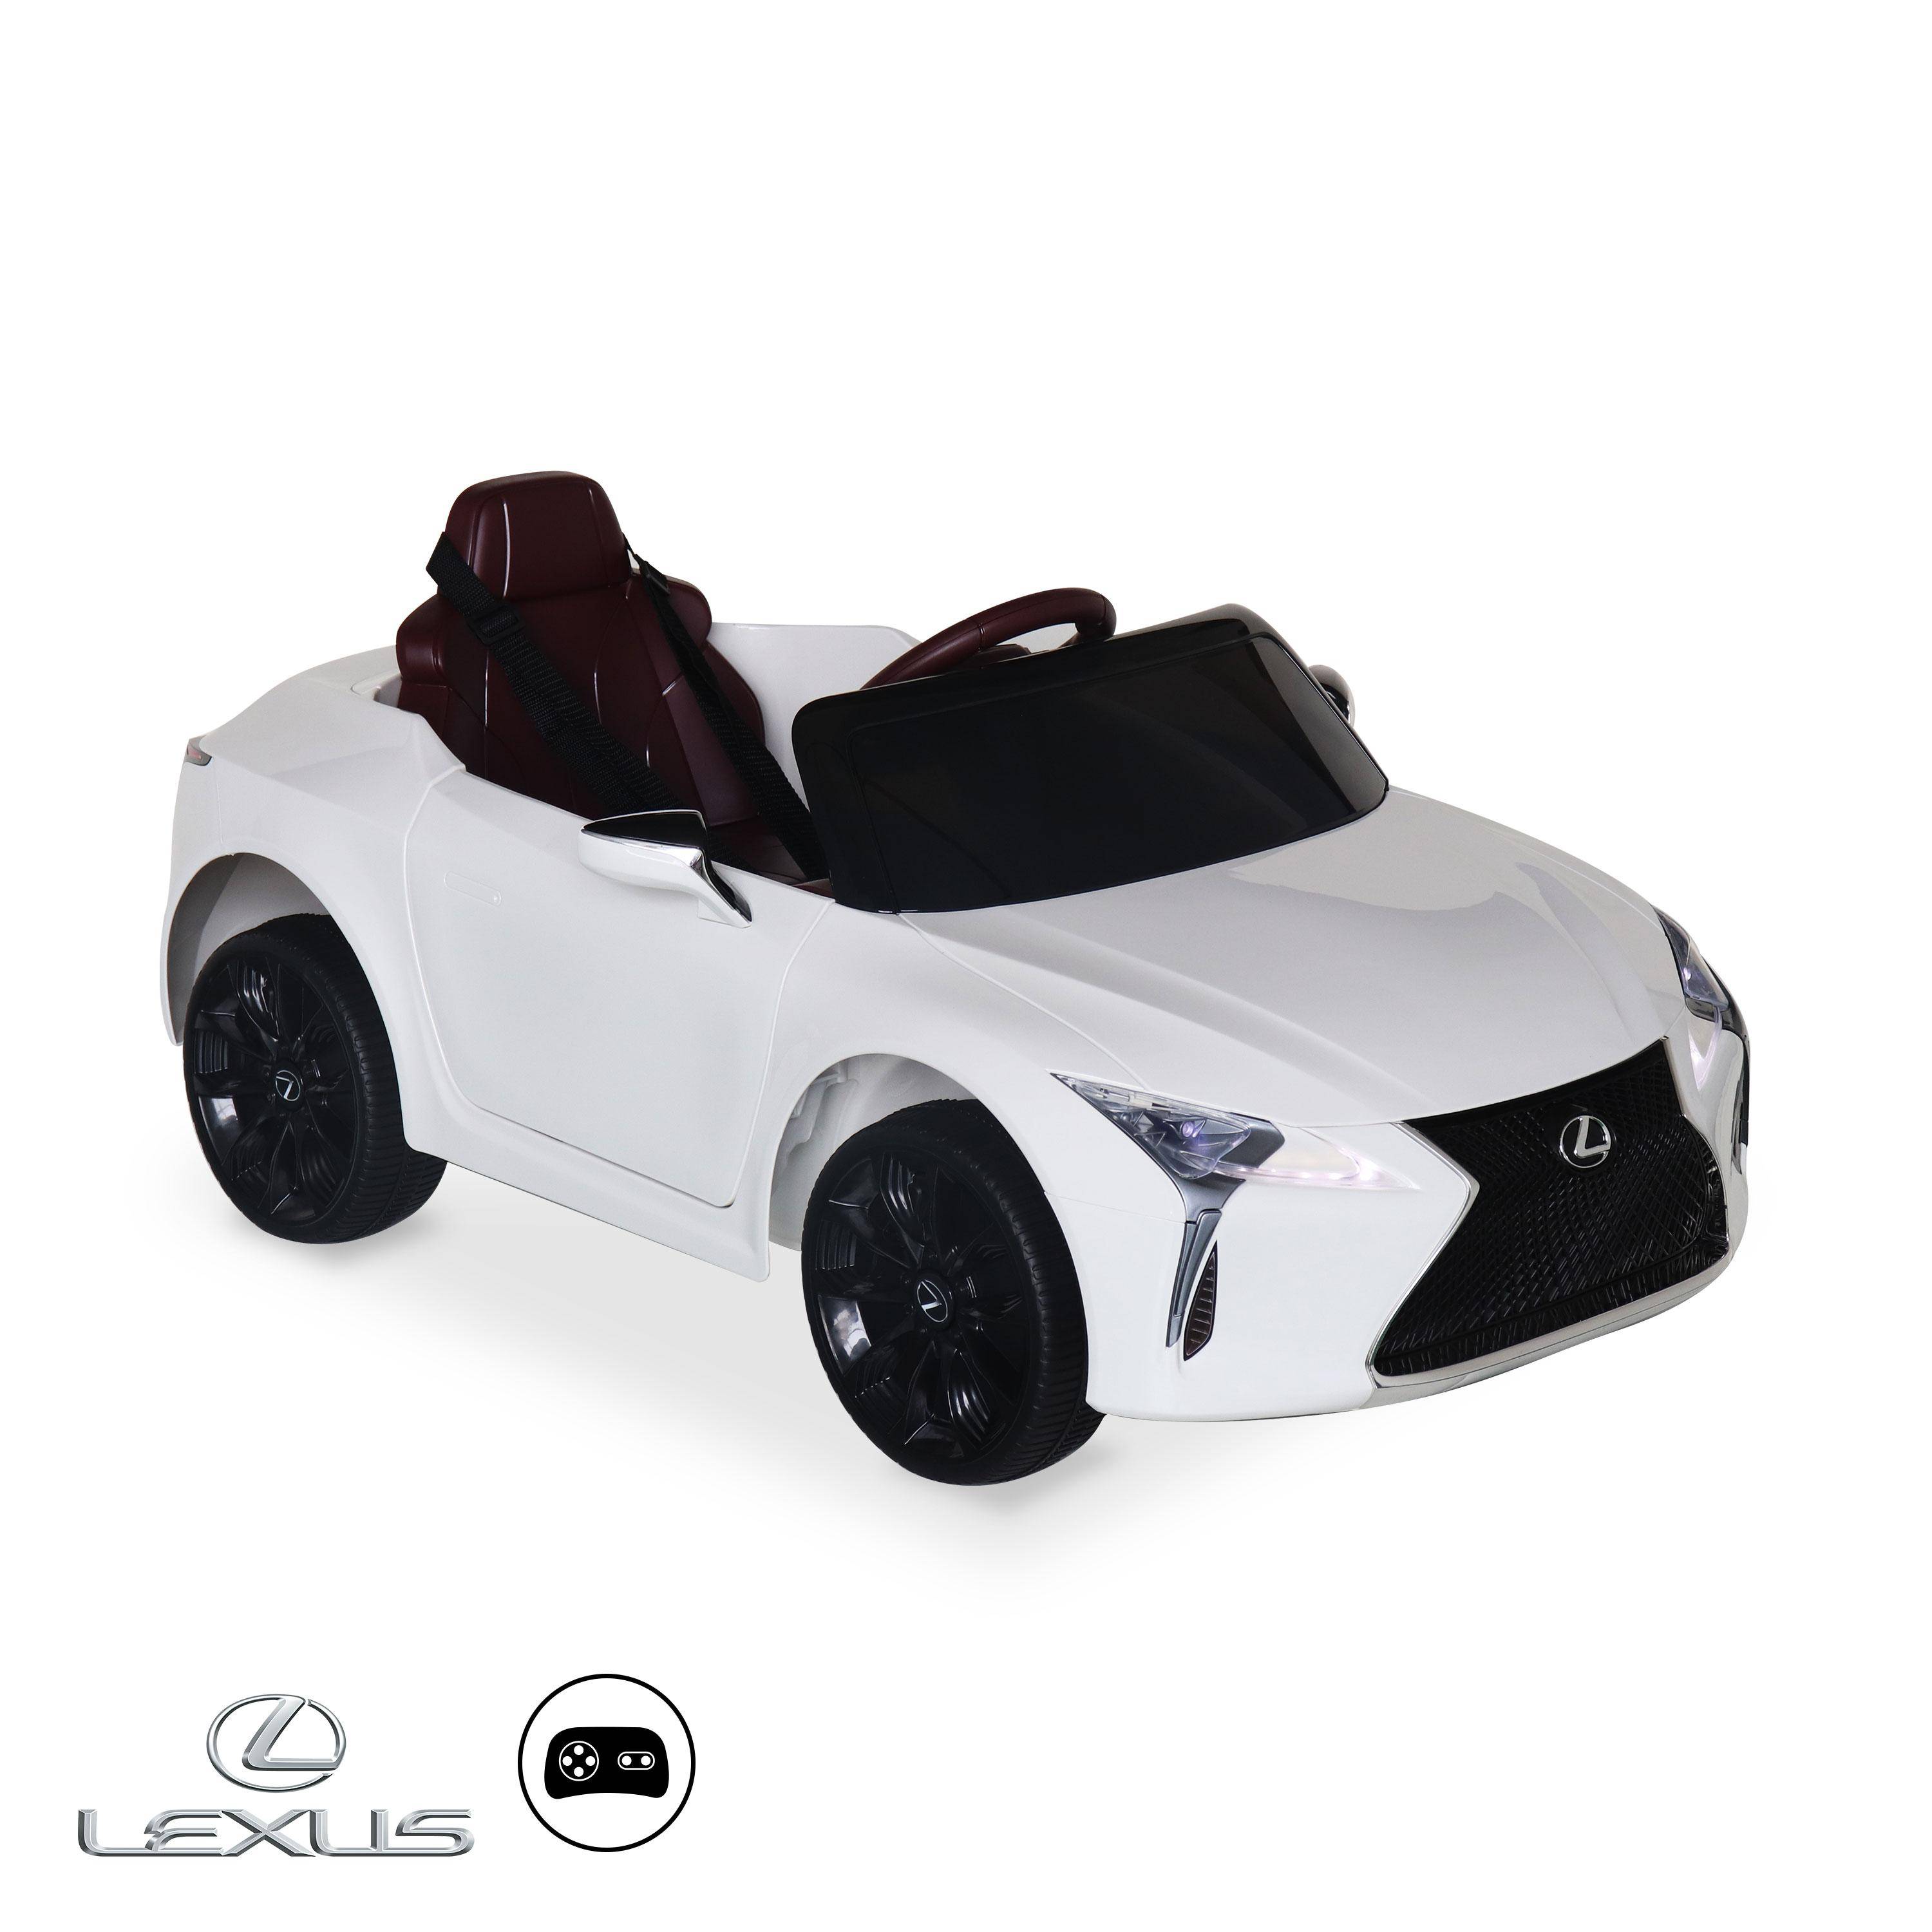 Children's electric car 12V, 1 seat, 4x4 with car radio and remote control - Lexus LC500 - White,sweeek,Photo1